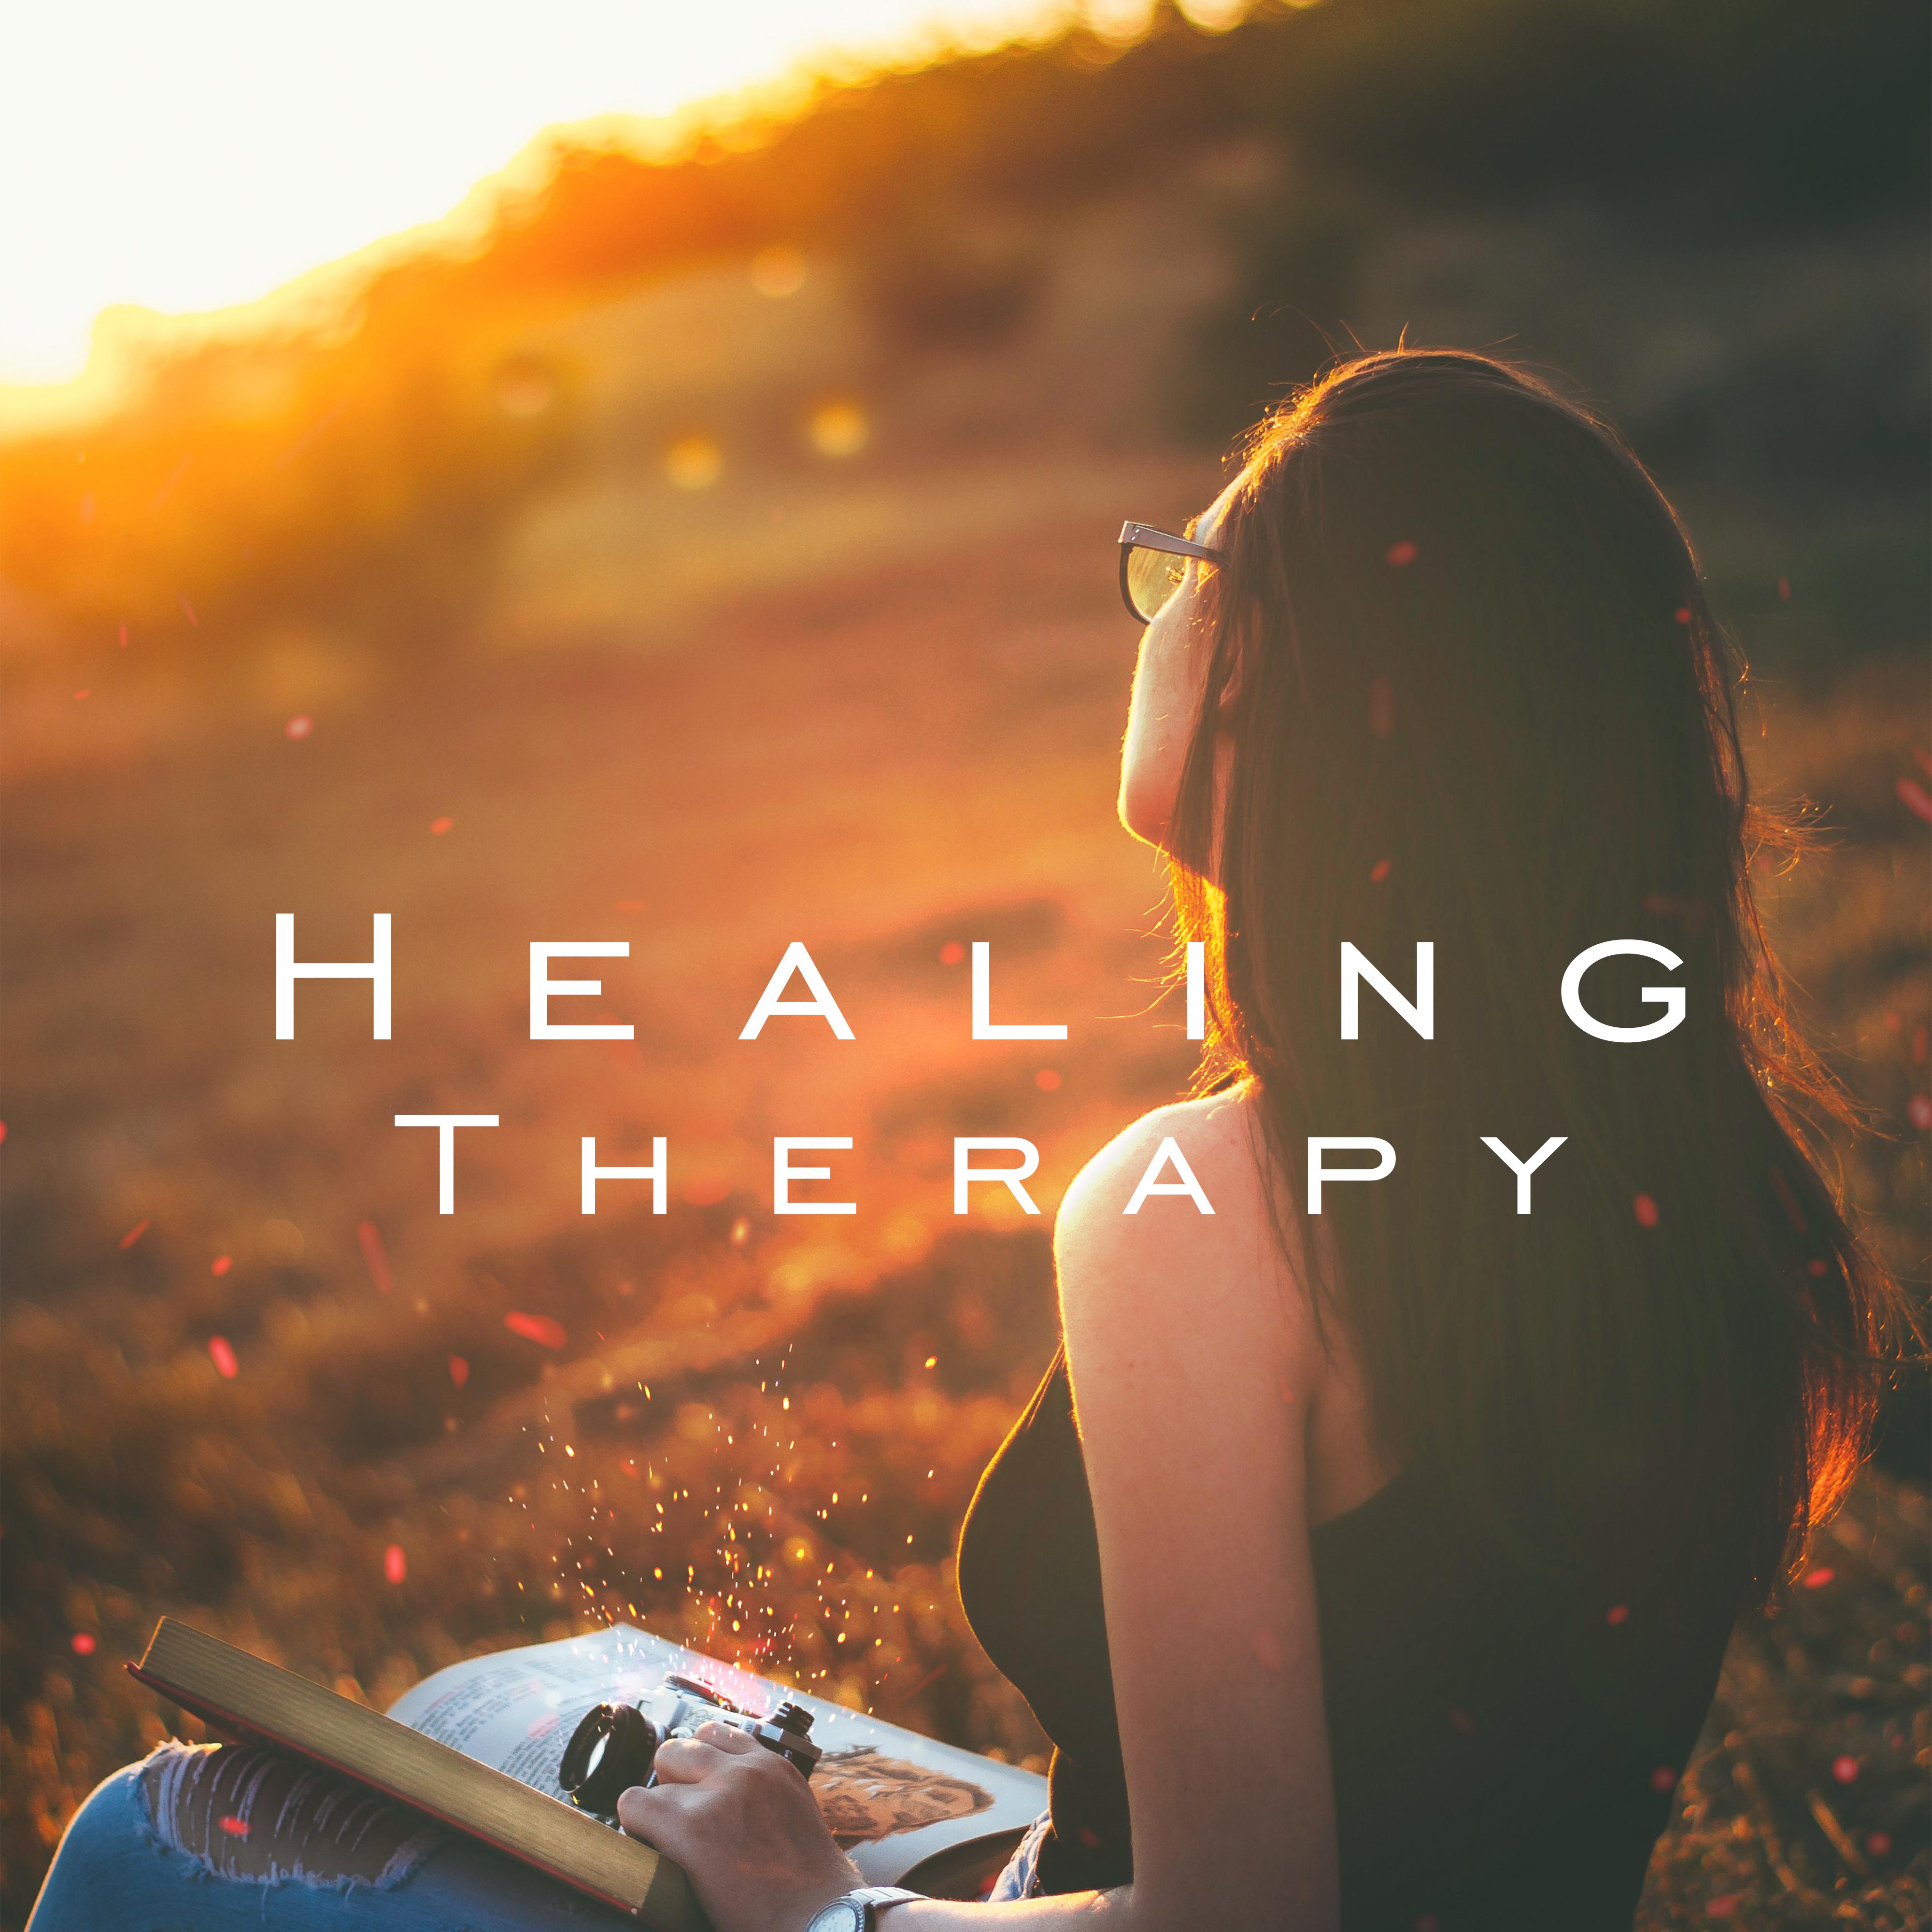 Healing Therapy – Relaxing Music, Nature Sounds, Relief Stress, Rest, Relax, Zen, Therapy Music